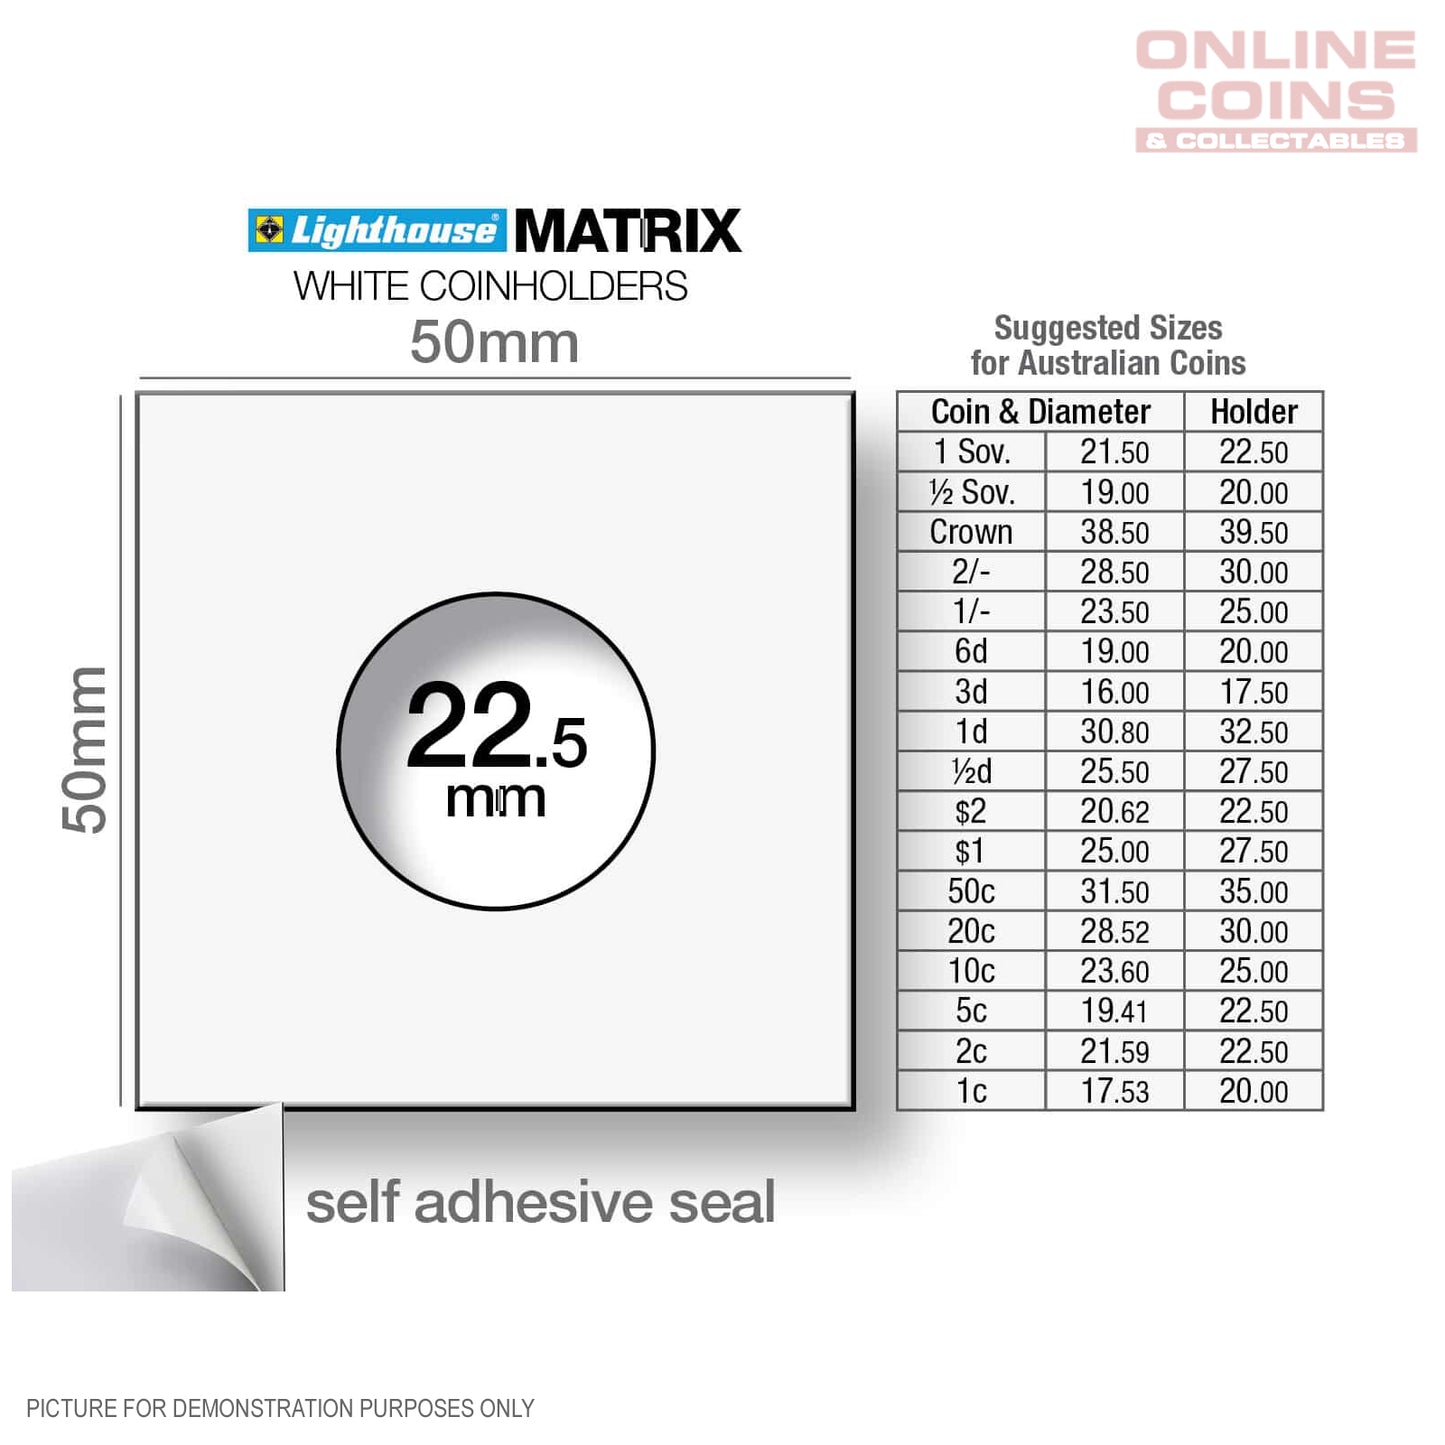 Lighthouse MATRIX WHITE 22.5mm Self Adhesive 2"x2" Coin Holders x 25 - Protection for your Coins (Suitable For Australian 2c and $2 Coins)